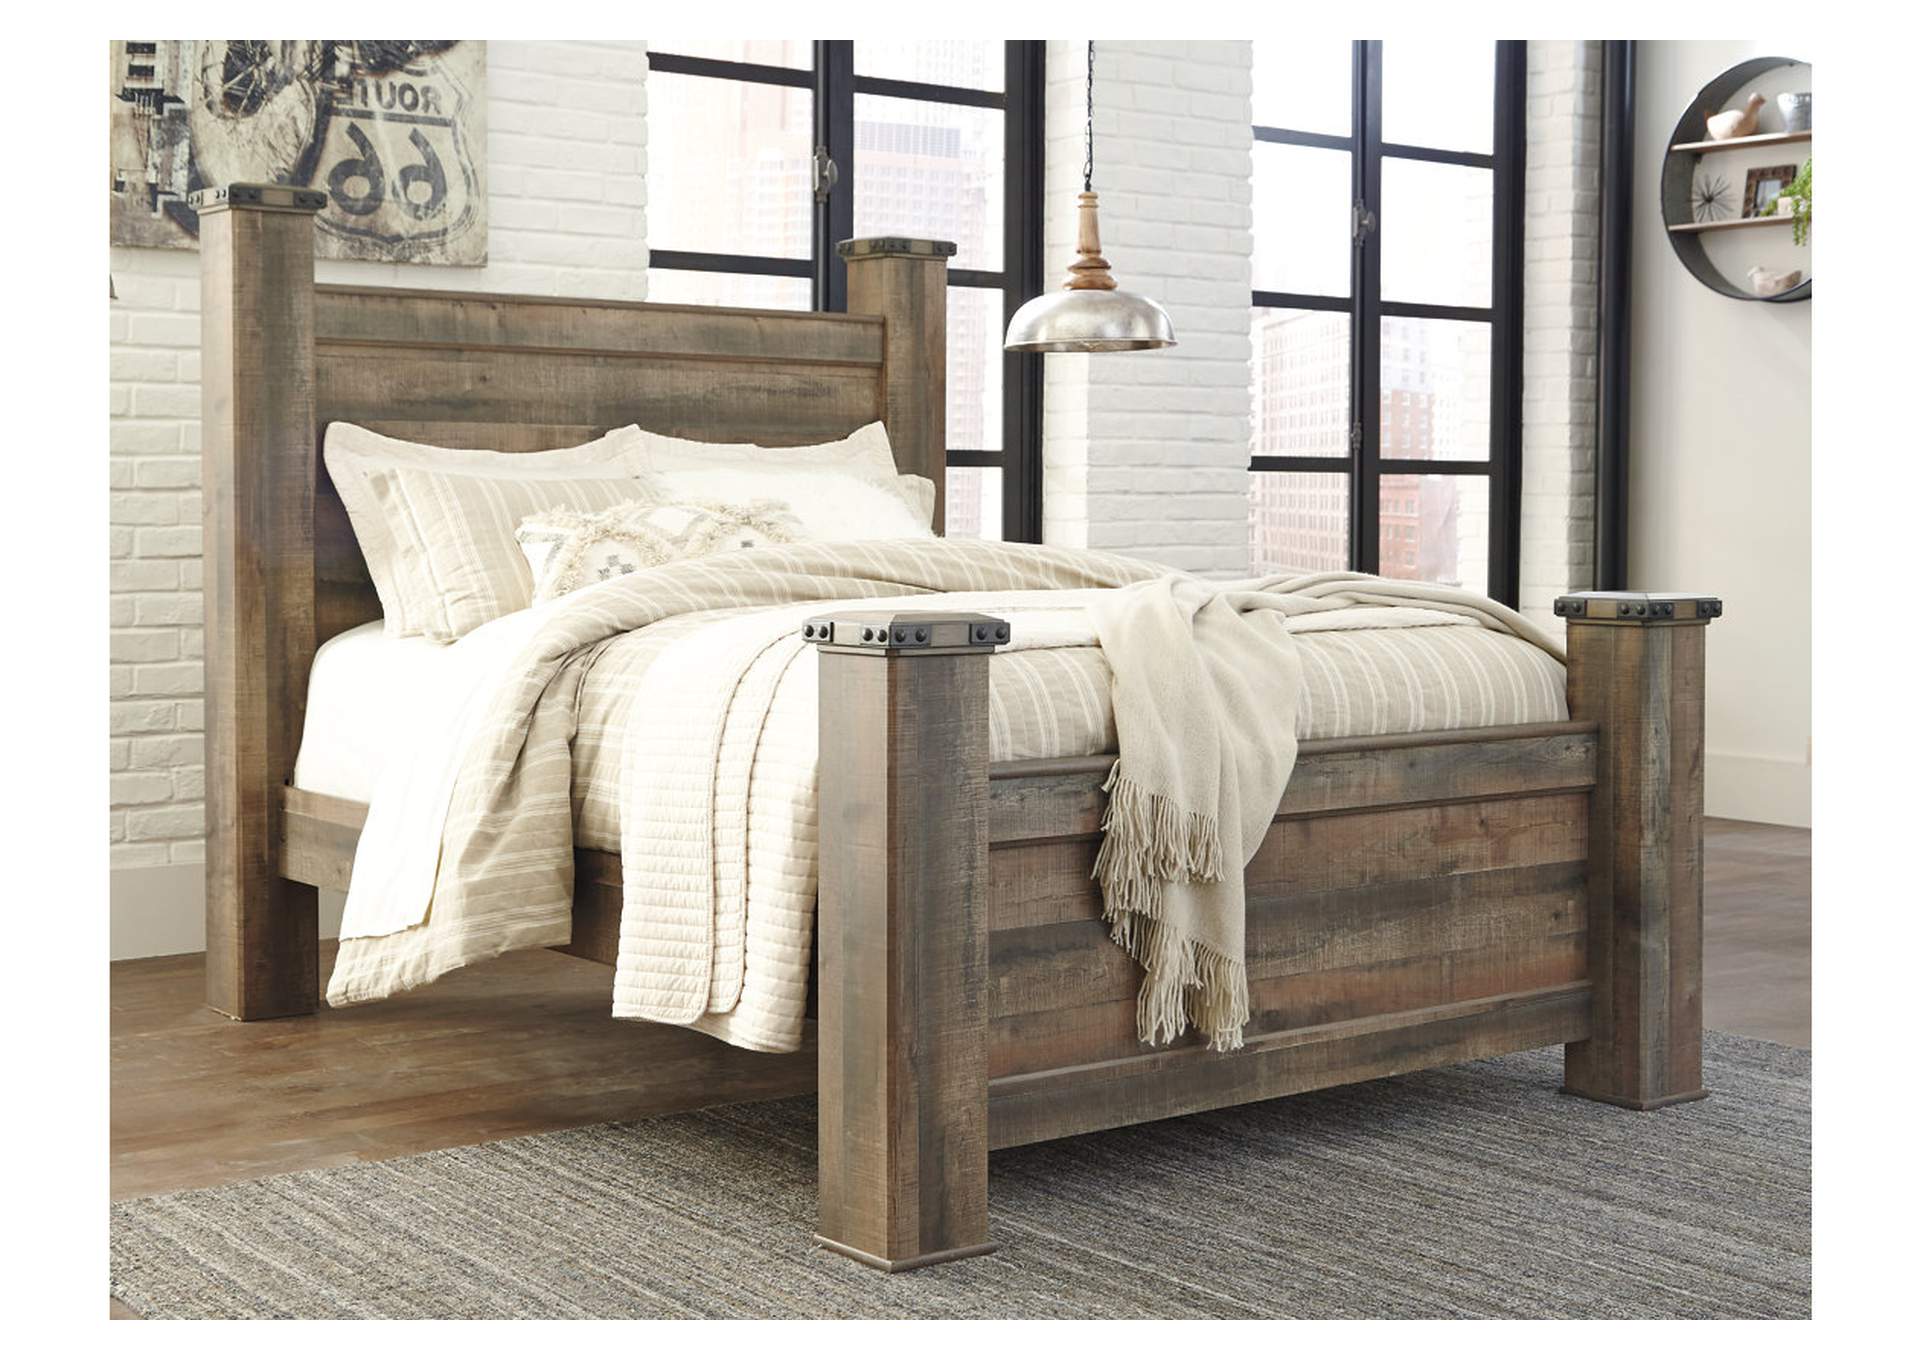 Trinell Queen Poster Bed,Signature Design By Ashley